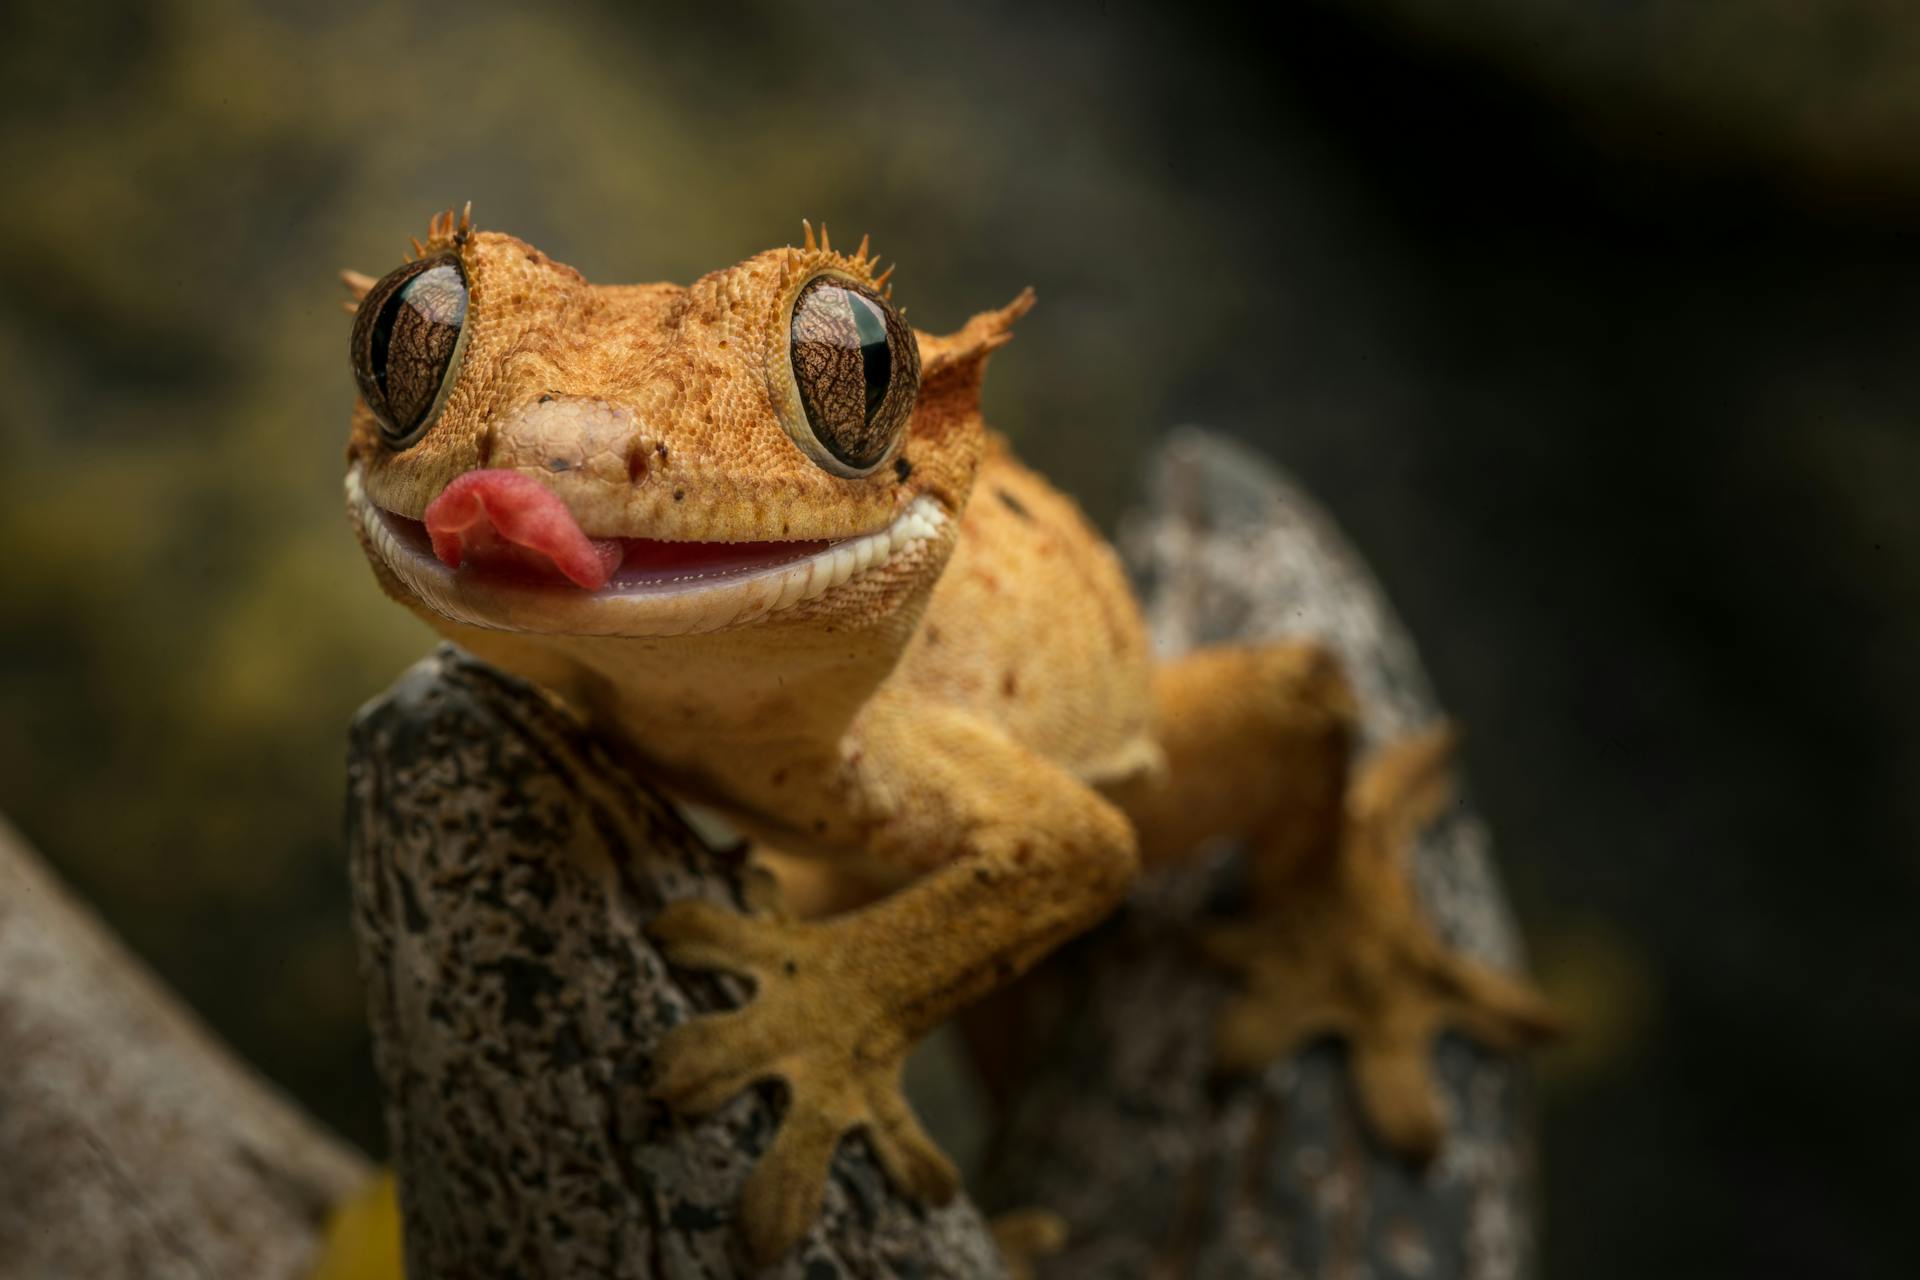 Close-up of a crested gecko | Source: Pexels